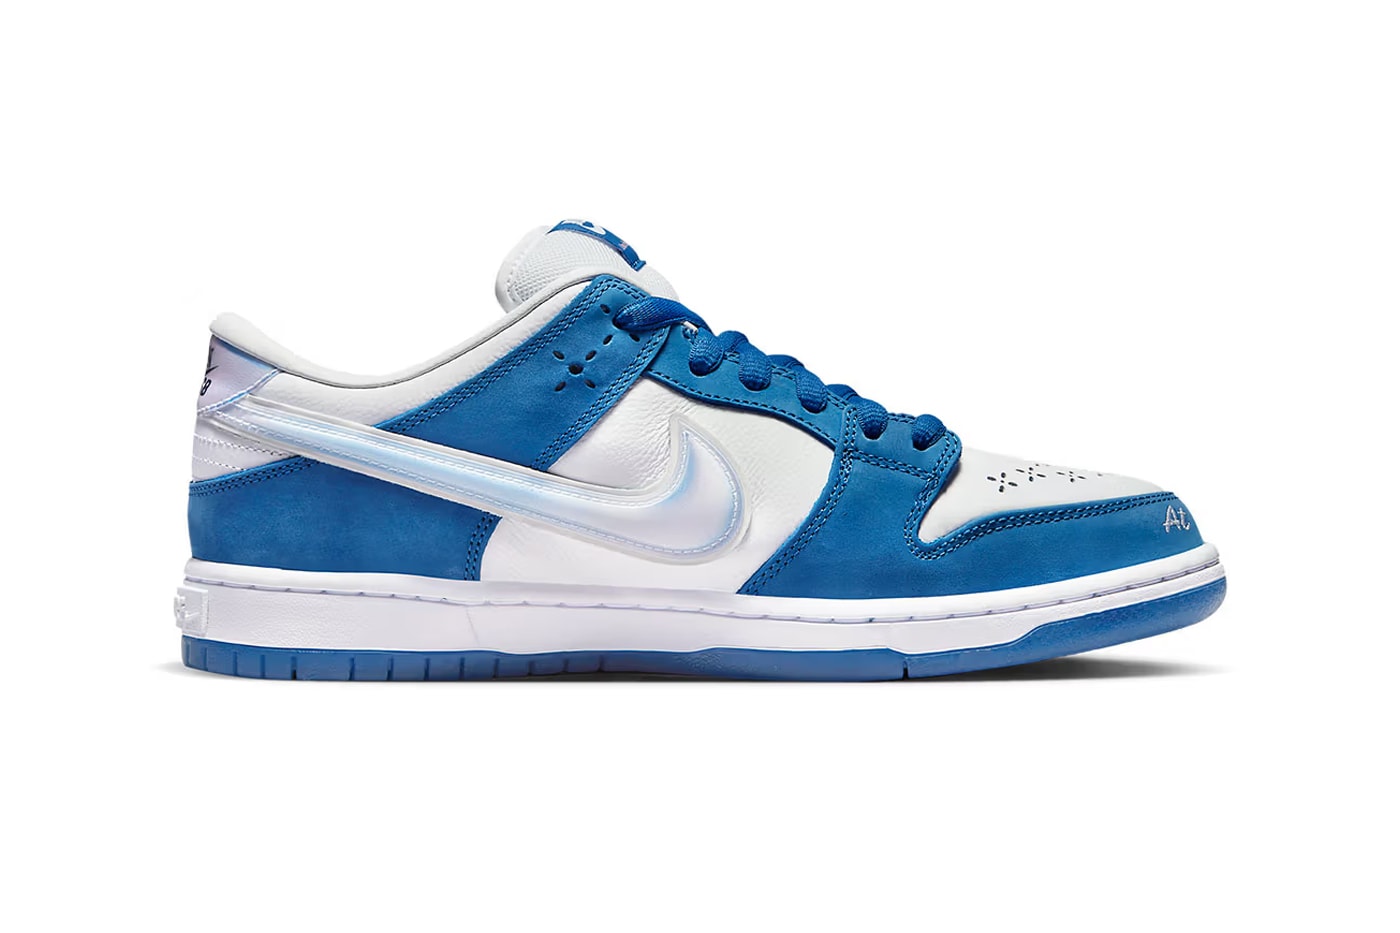 The Born x Raised x Nike SB Dunk Low to Release on September 28